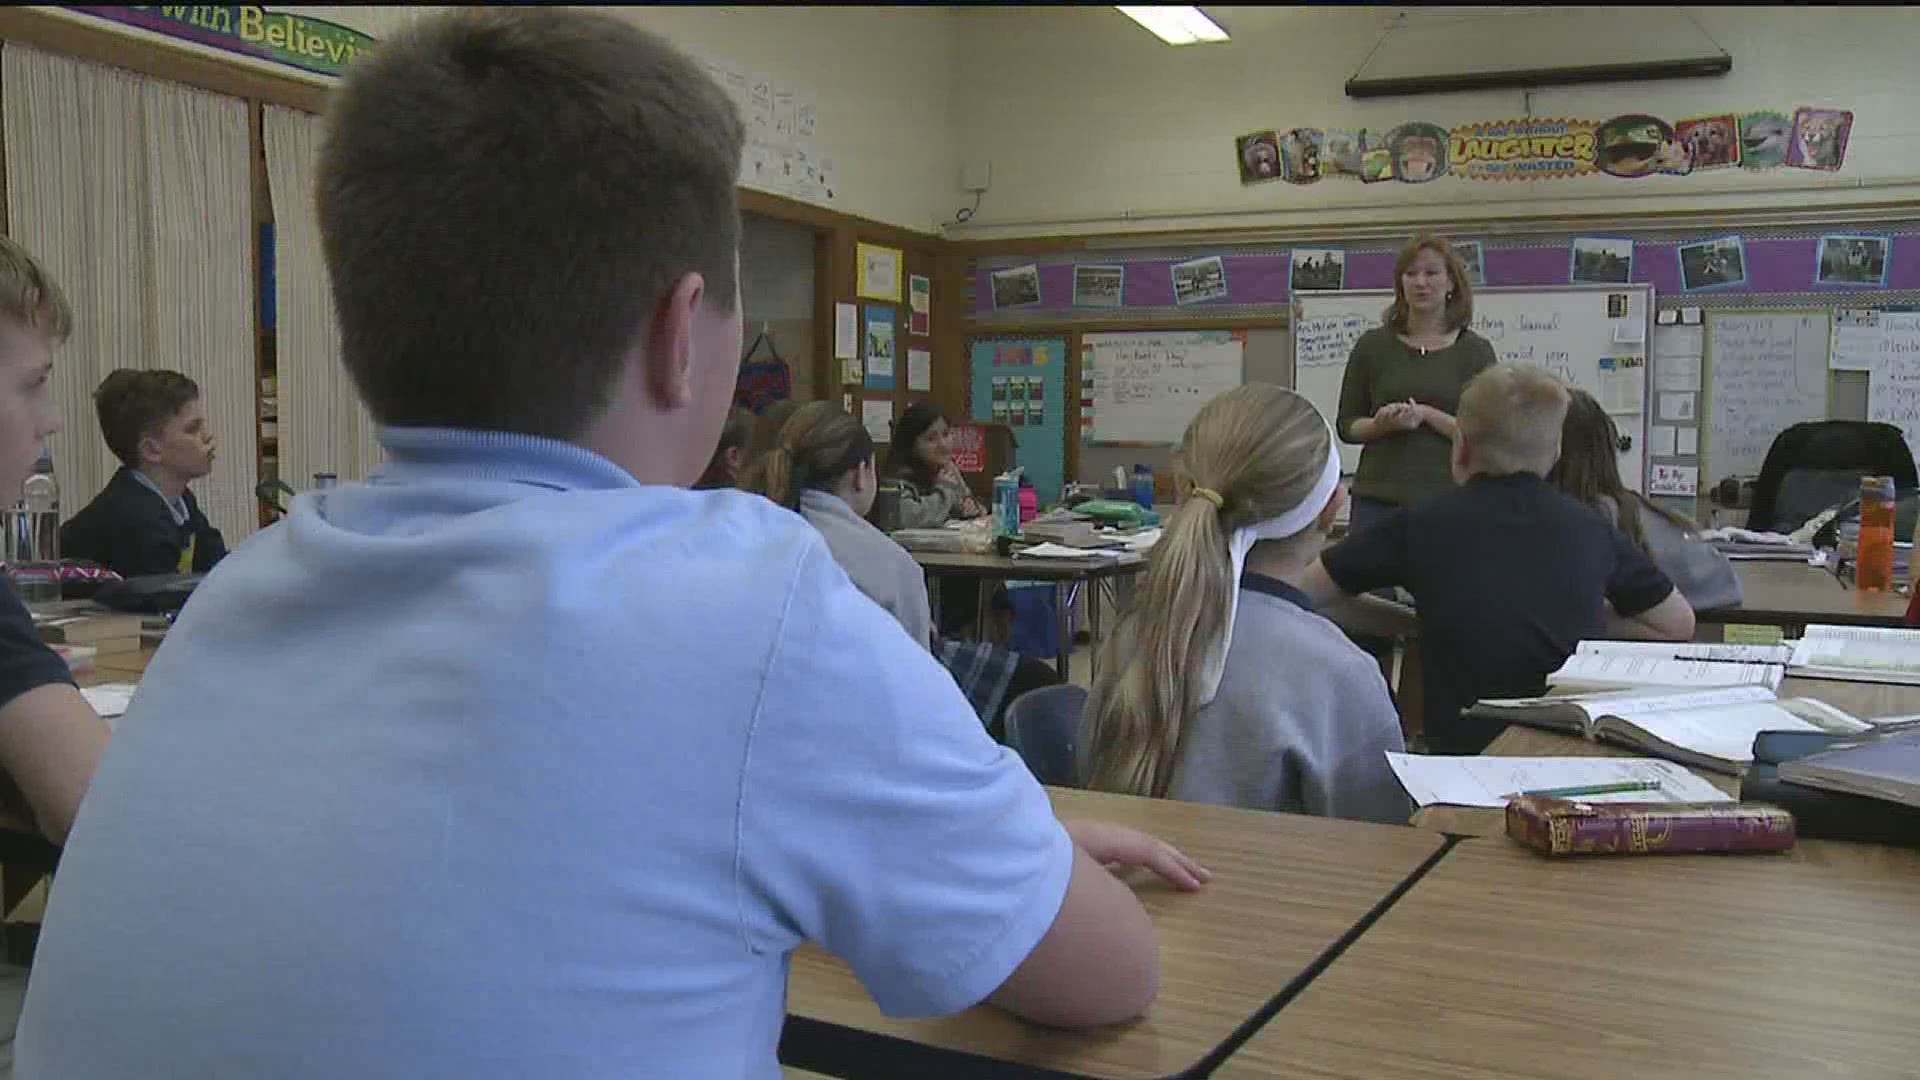 Saint Paul the Apostle Catholic School says they want to keep their students and staff safe.